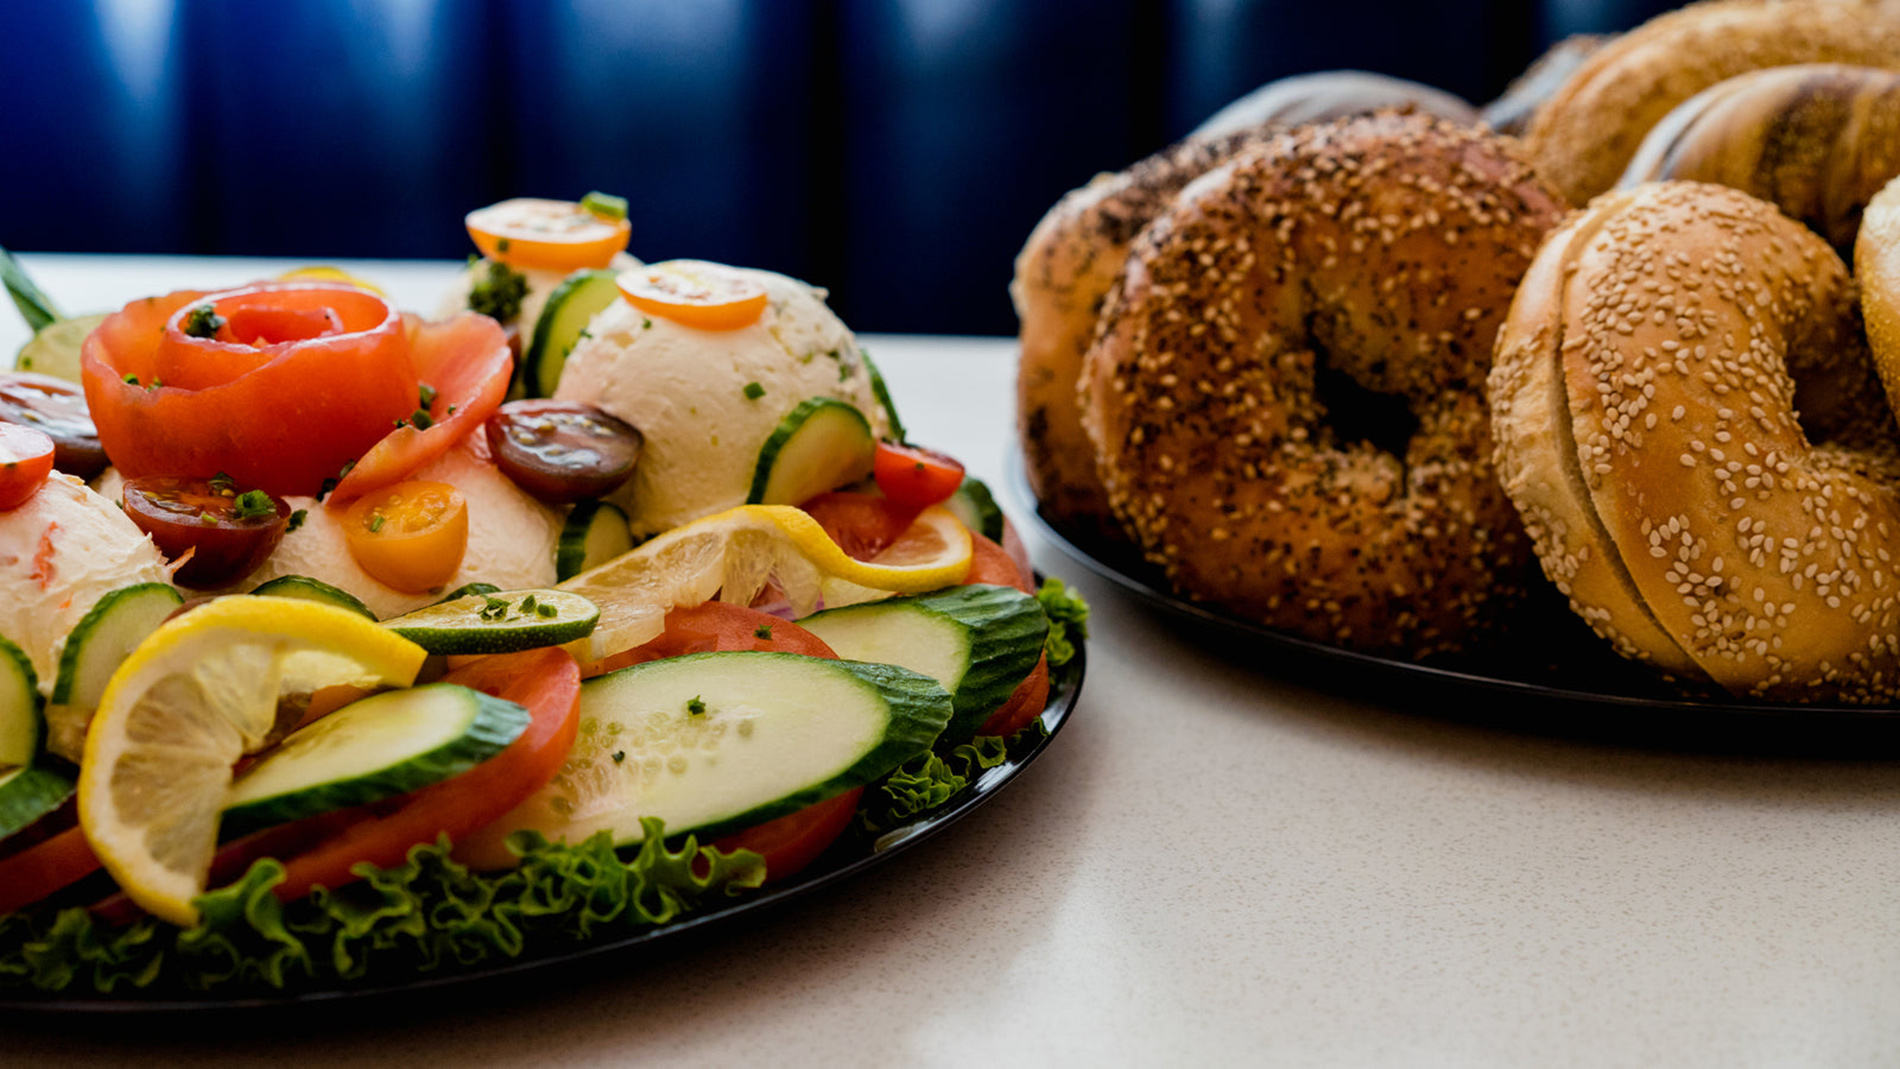 c and b boiled bagels in wood river, illinois